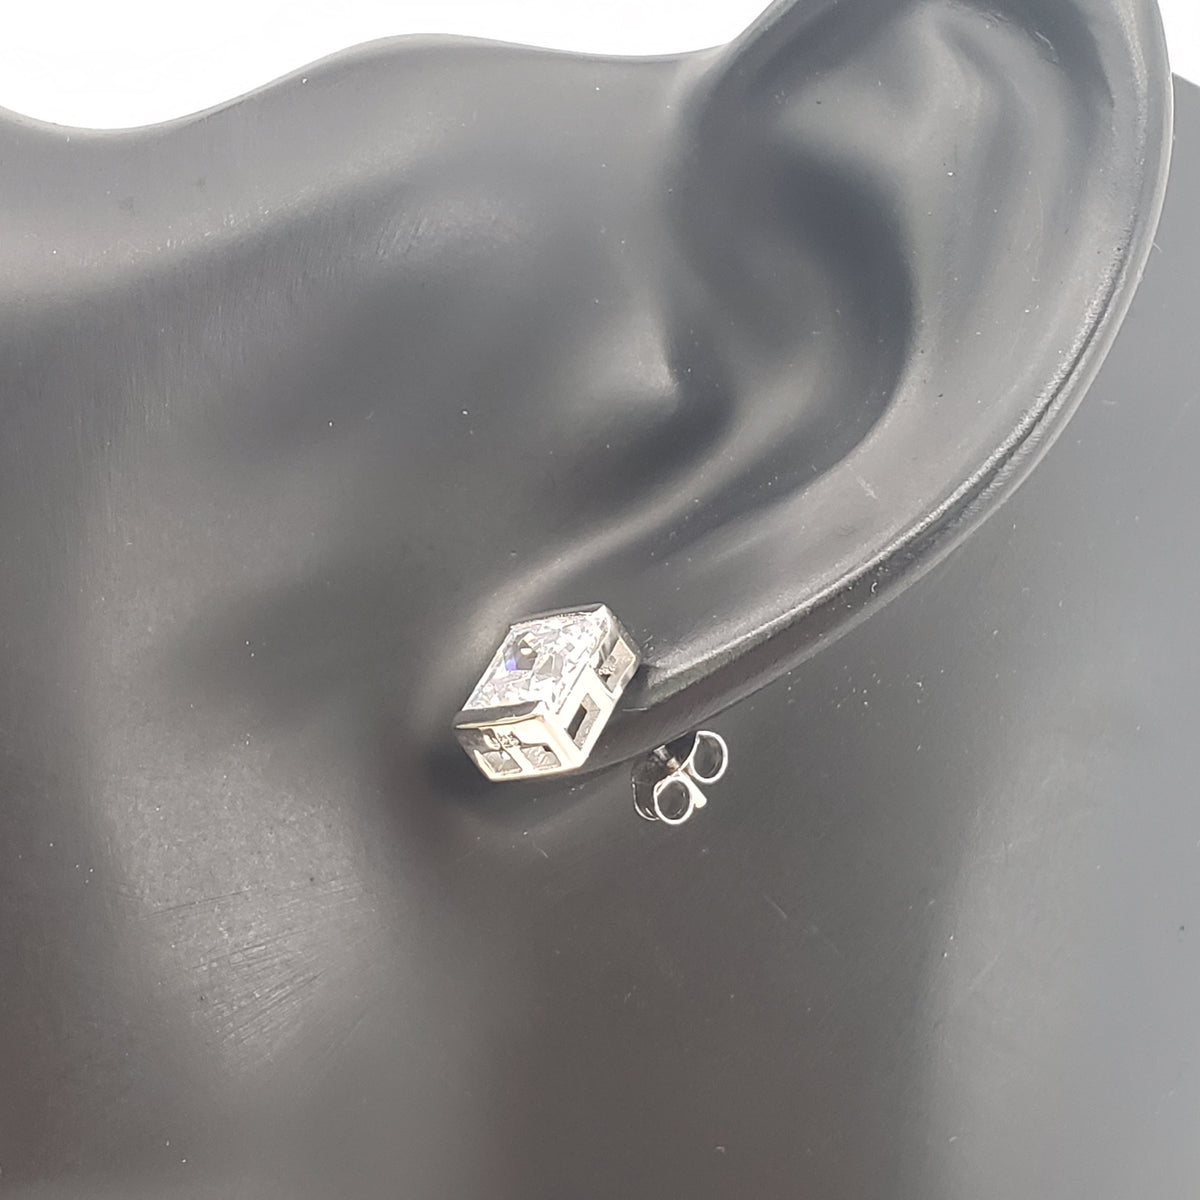 925 Sterling Silver Cubic Zirconia Stud with Butterfly Backs - 9mm x 7mm